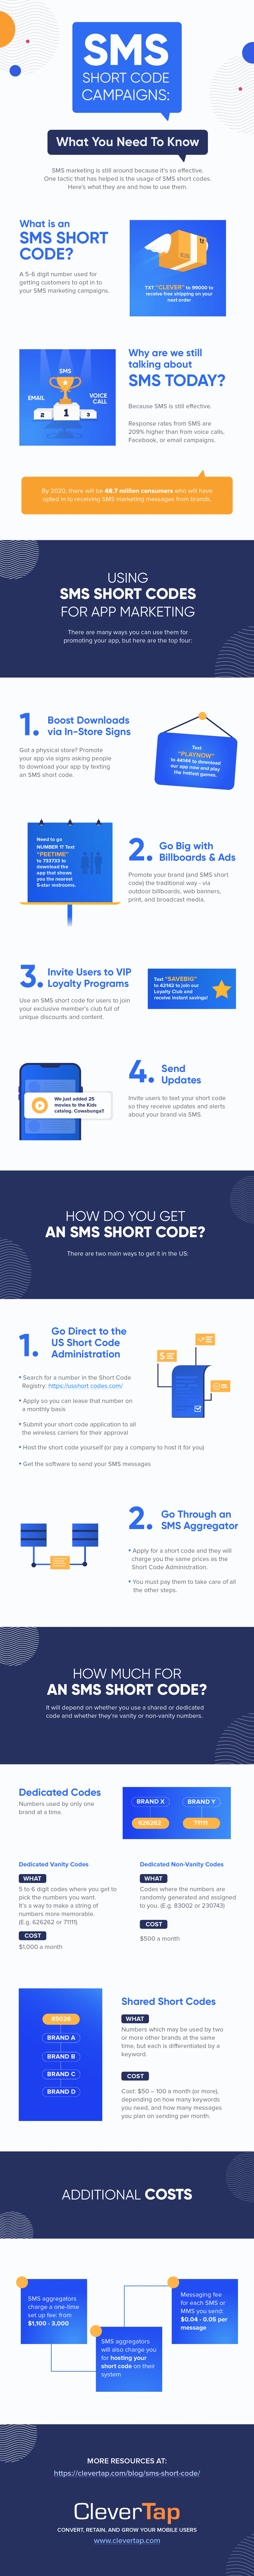 SMS Short Code infographic